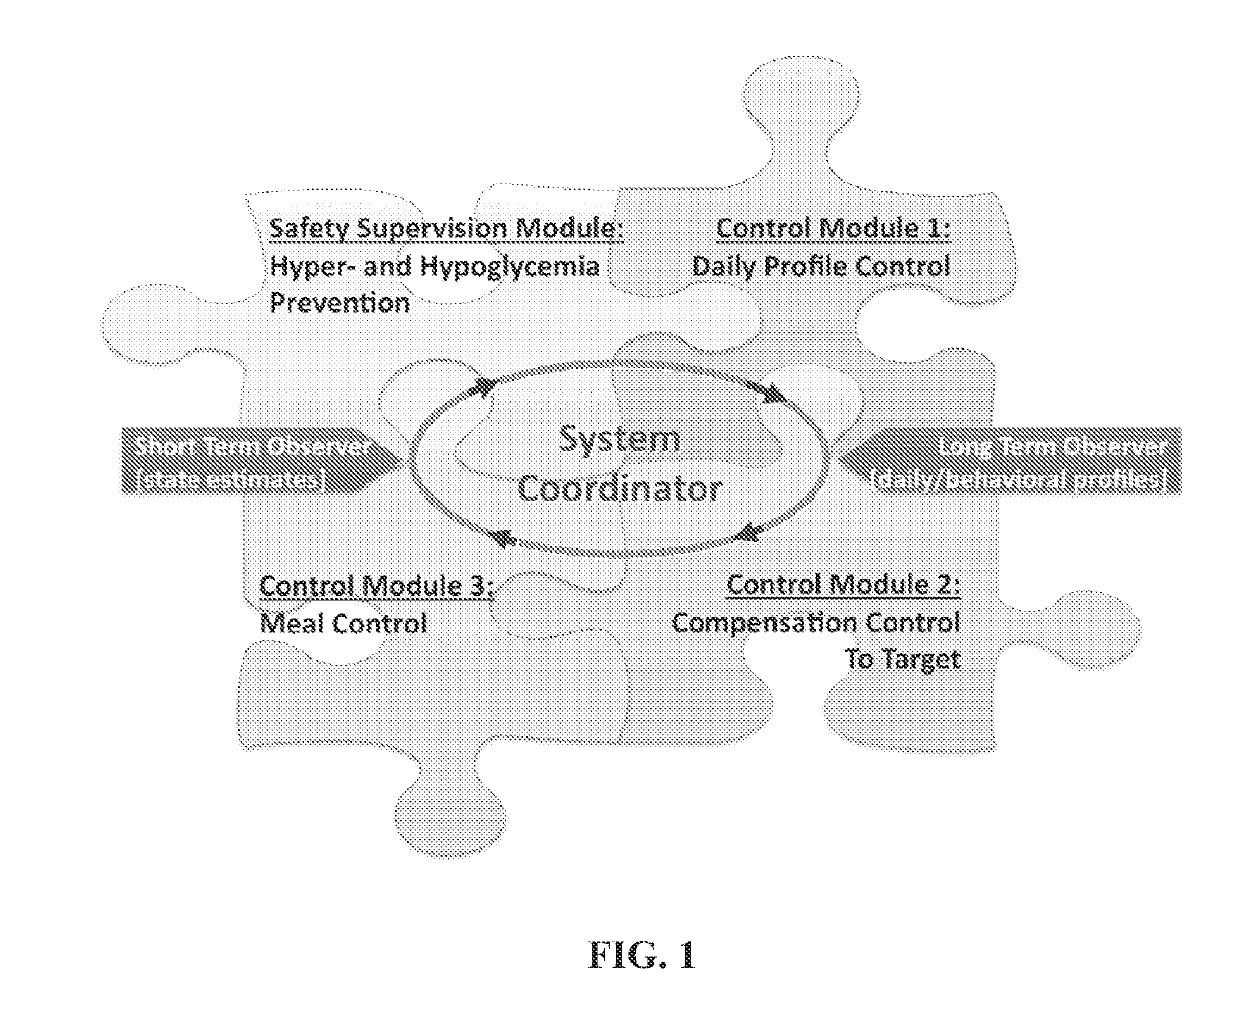 System coordinator and modular architecture for open-loop and closed-loop control of diabetes